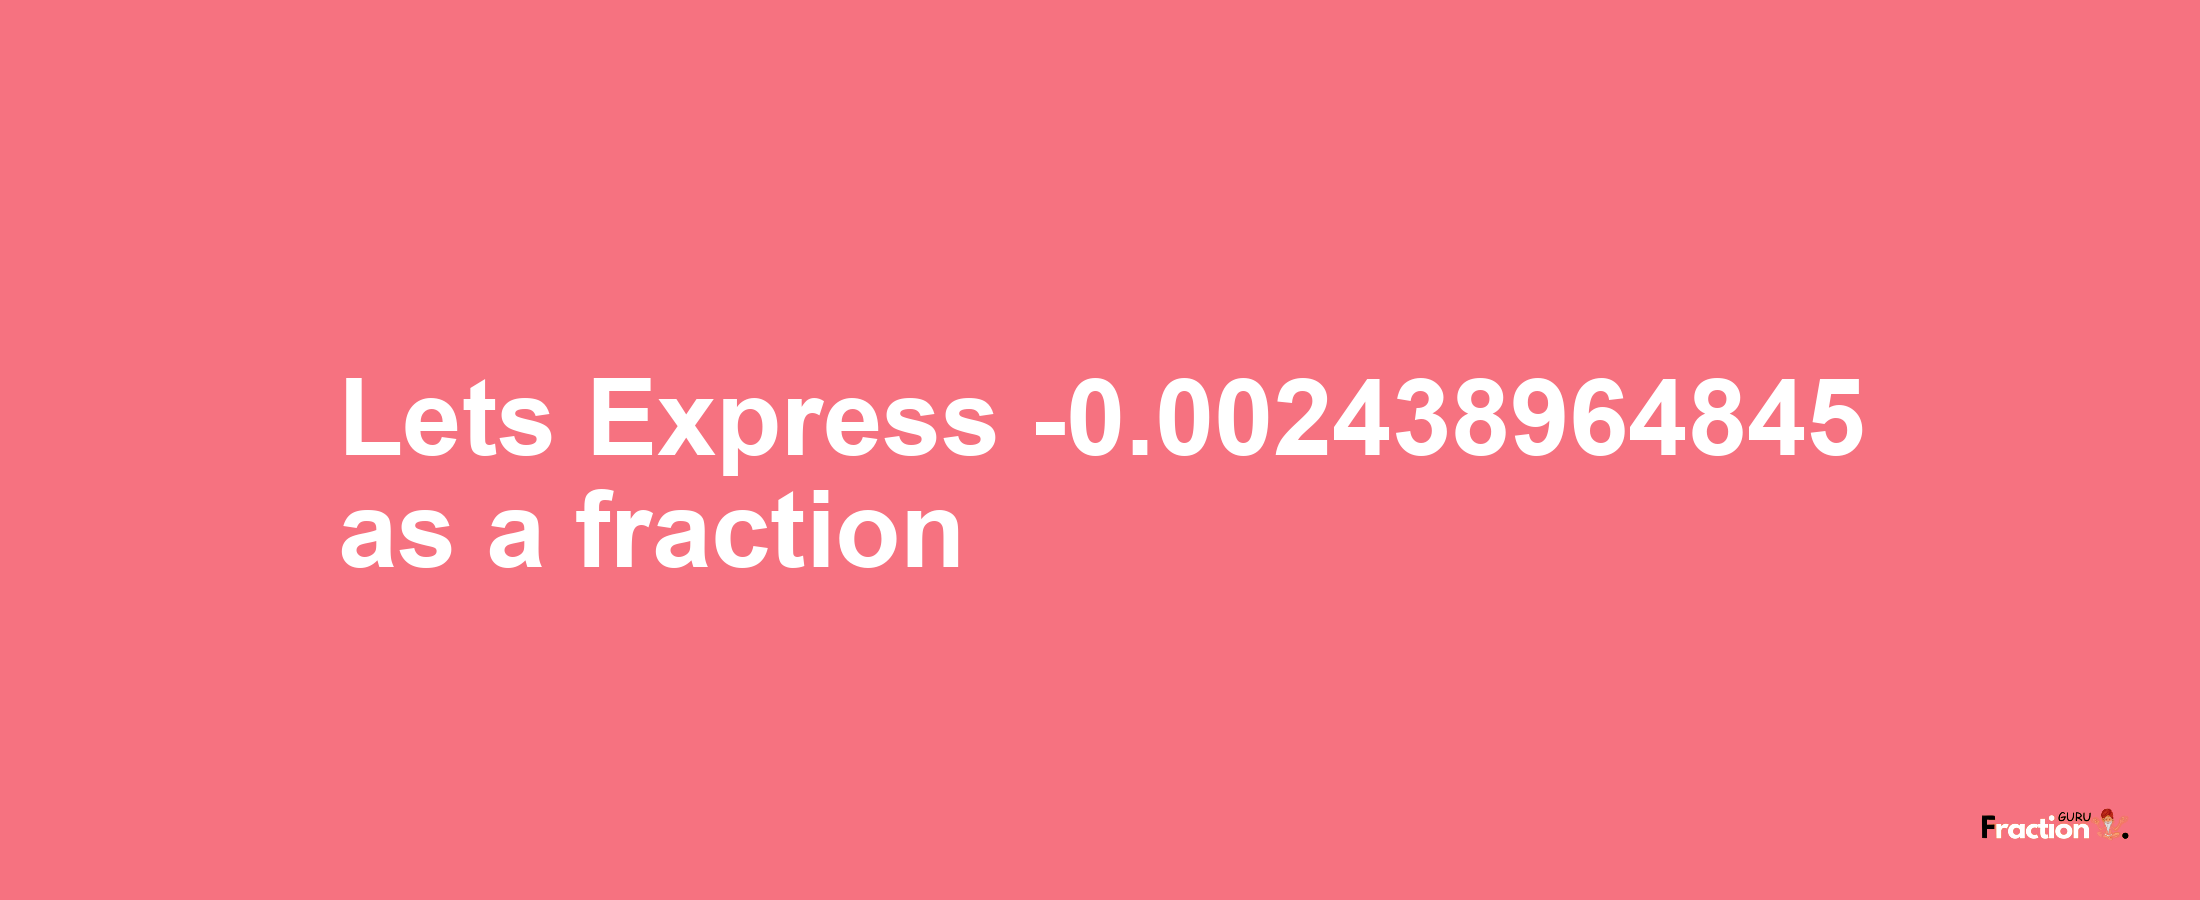 Lets Express -0.002438964845 as afraction